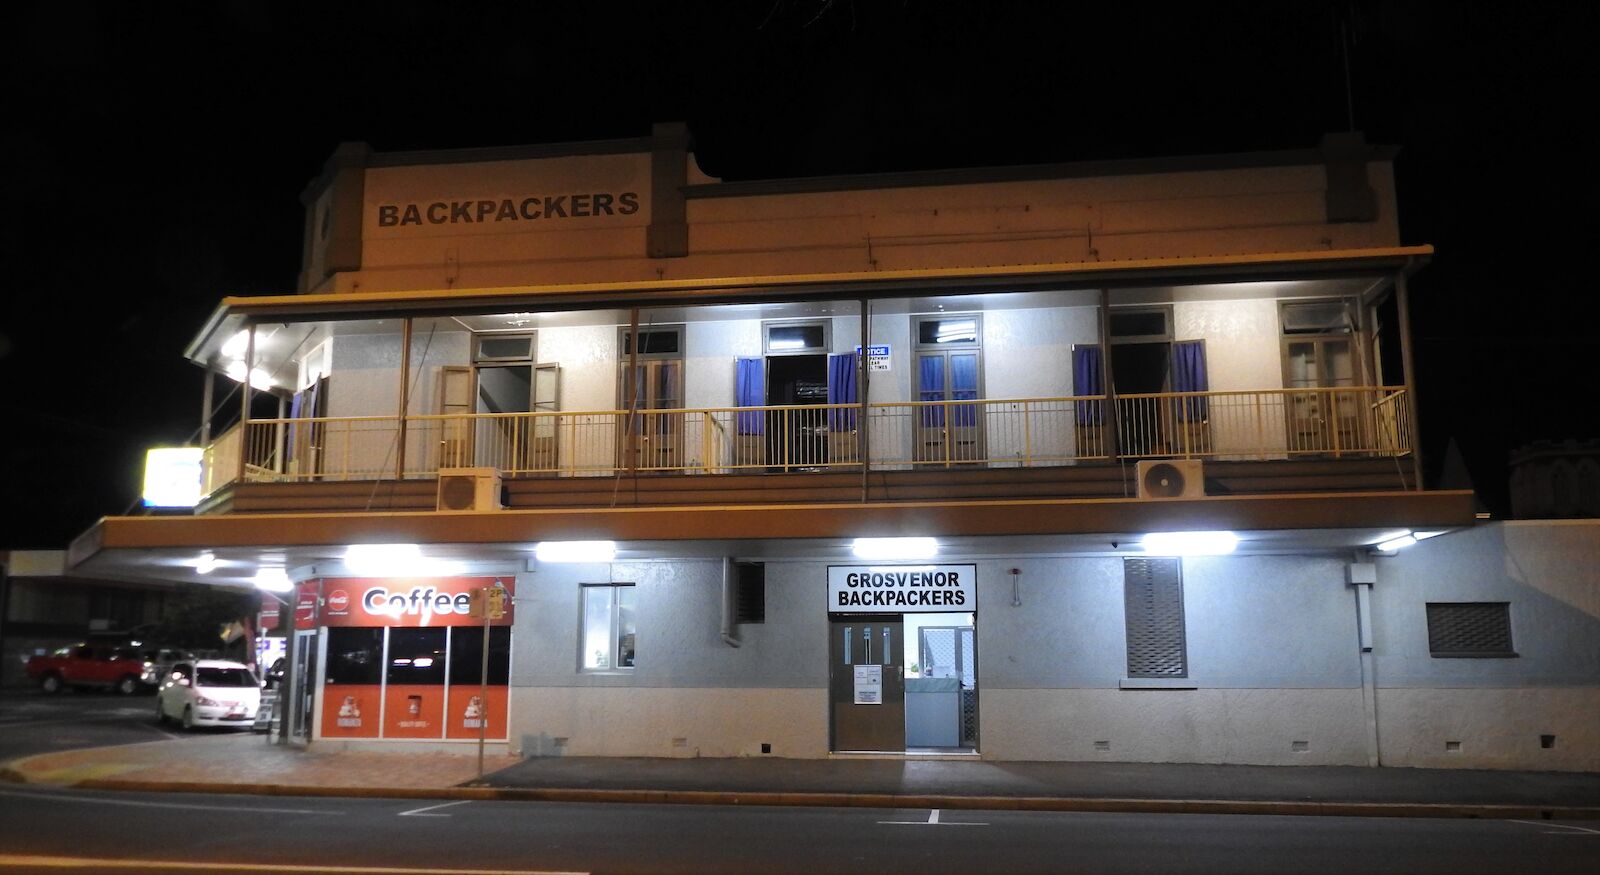 Price Comparison for Grosvenor Backpackers in Bundaberg (with HONEST